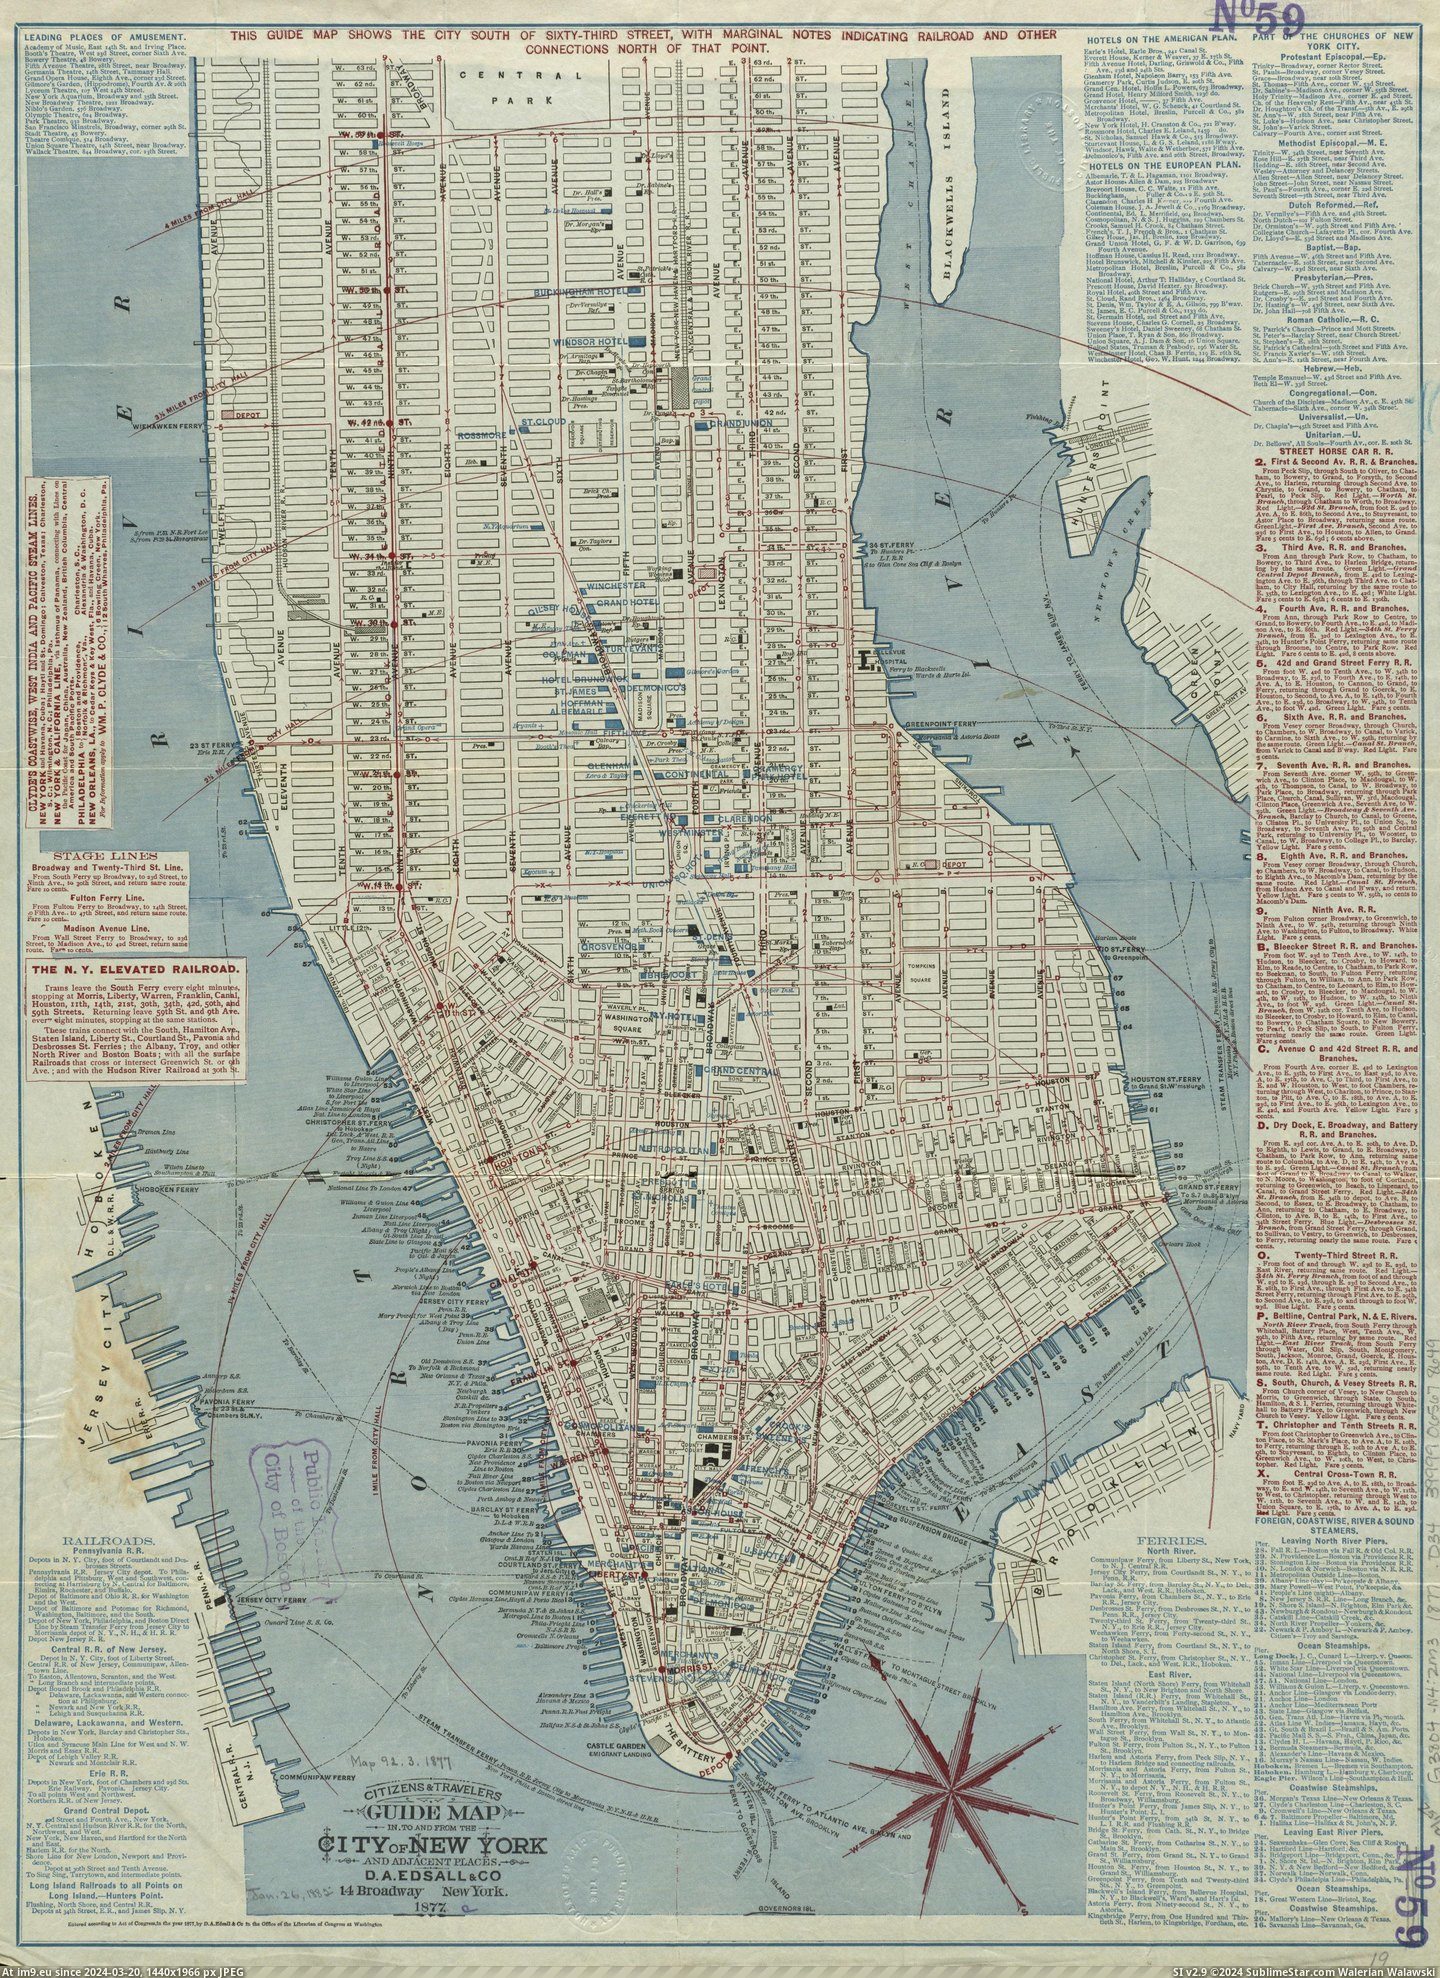 #Map #City #Lines #Leading #Stage #Churches #Guide #York #Hotels [Mapporn] Guide map of the City of New York, 1877. Hotels, churches, railroads, stage lines, ferries, steamships, and Leading Pl Pic. (Image of album My r/MAPS favs))